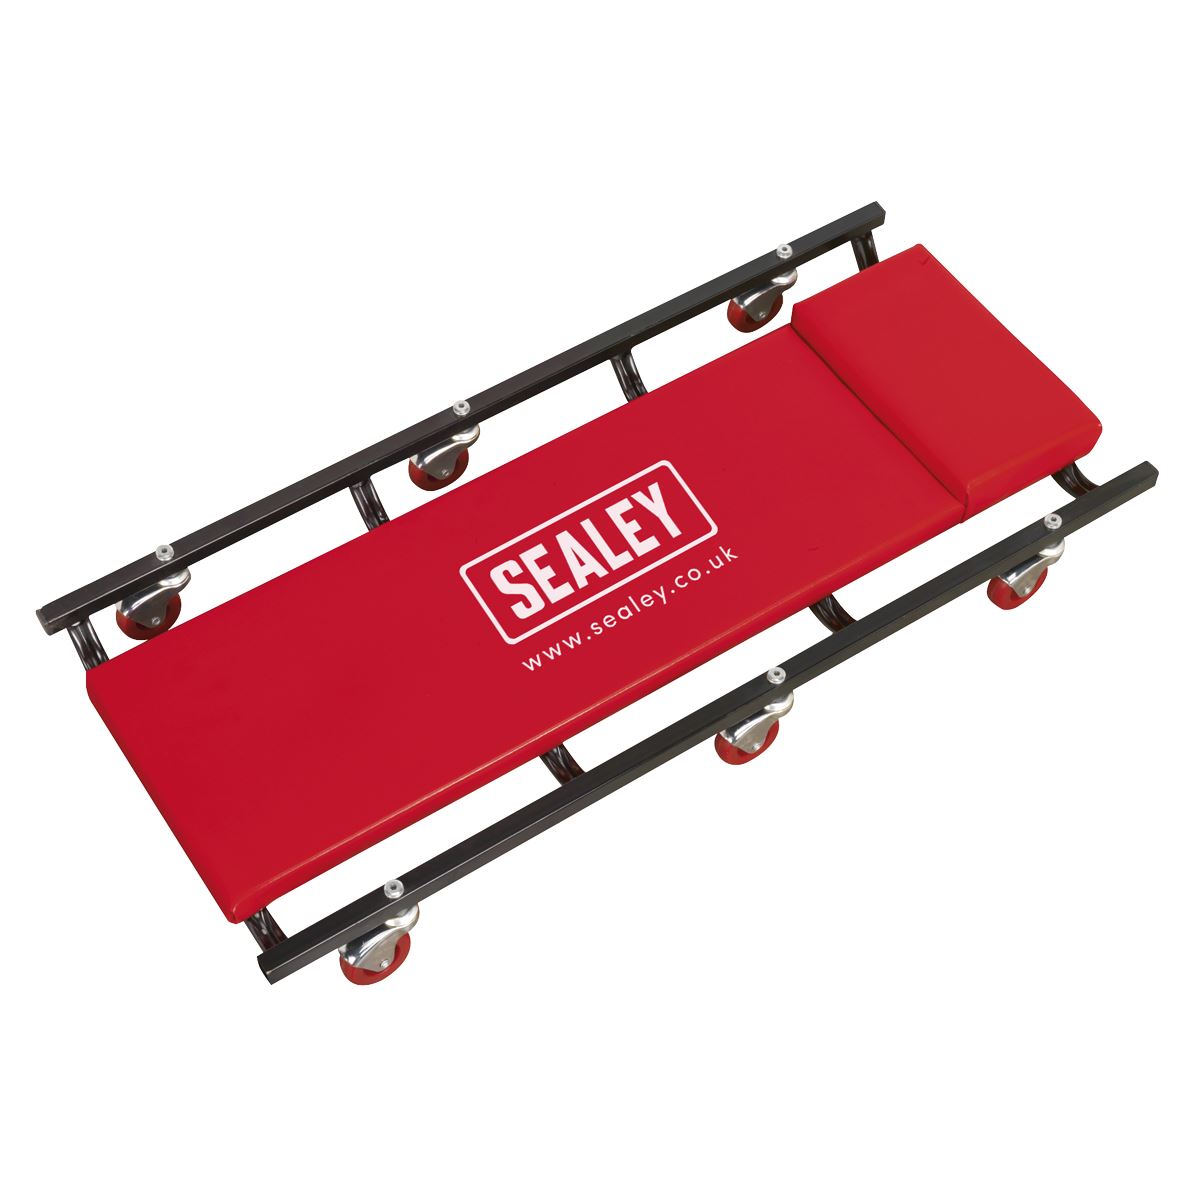 Sealey 36" Deluxe American-Style Creeper with Steel Frame & 6 Wheels - Red